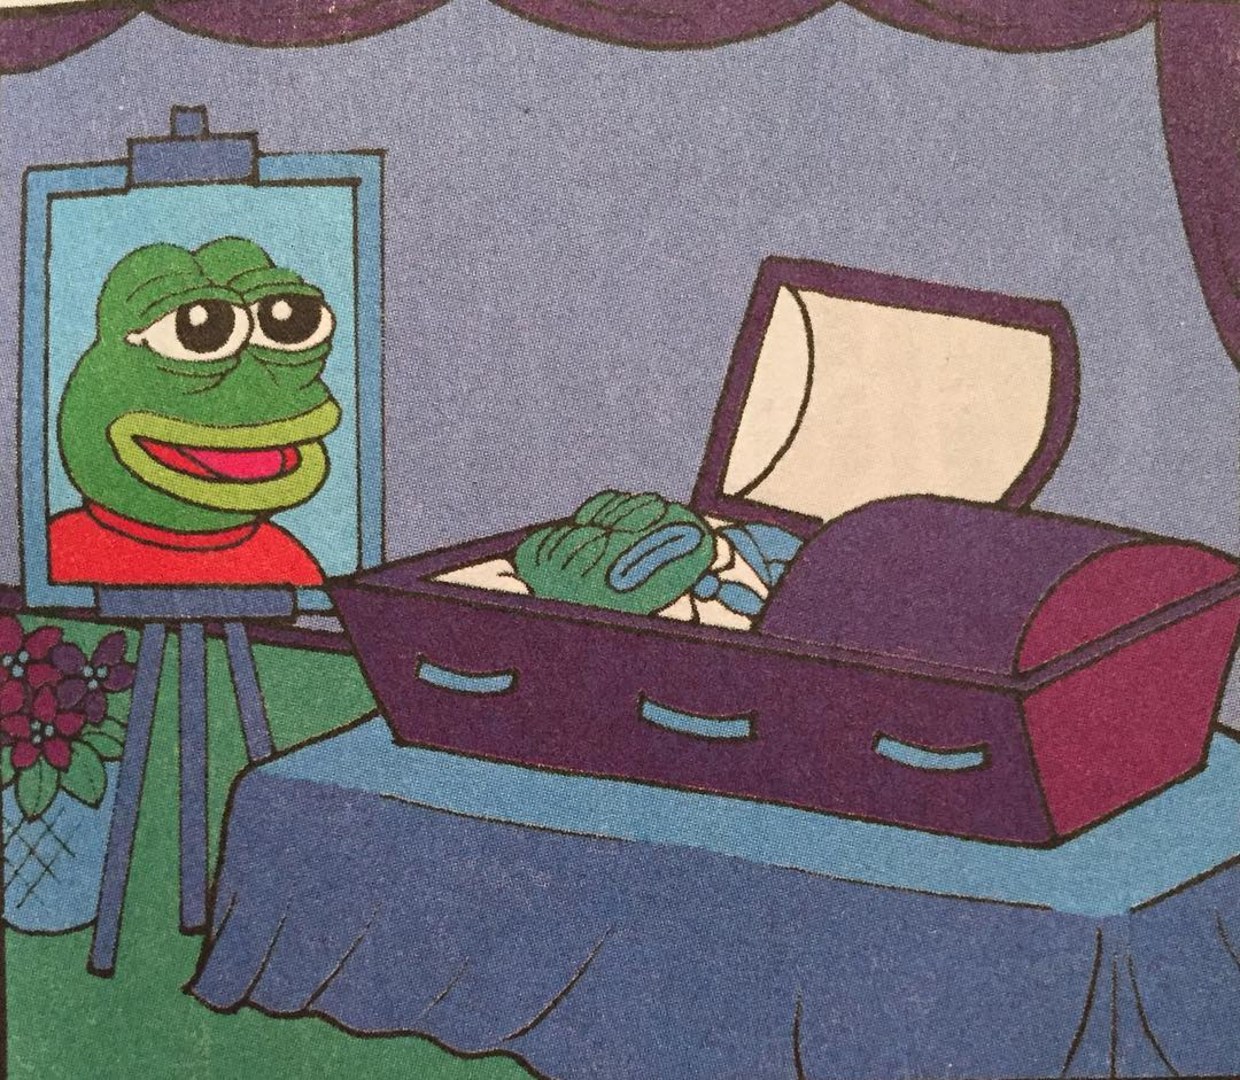 Pepe the Frog Is Dead: Creator Kills Off Meme Absorbed by Far-Right